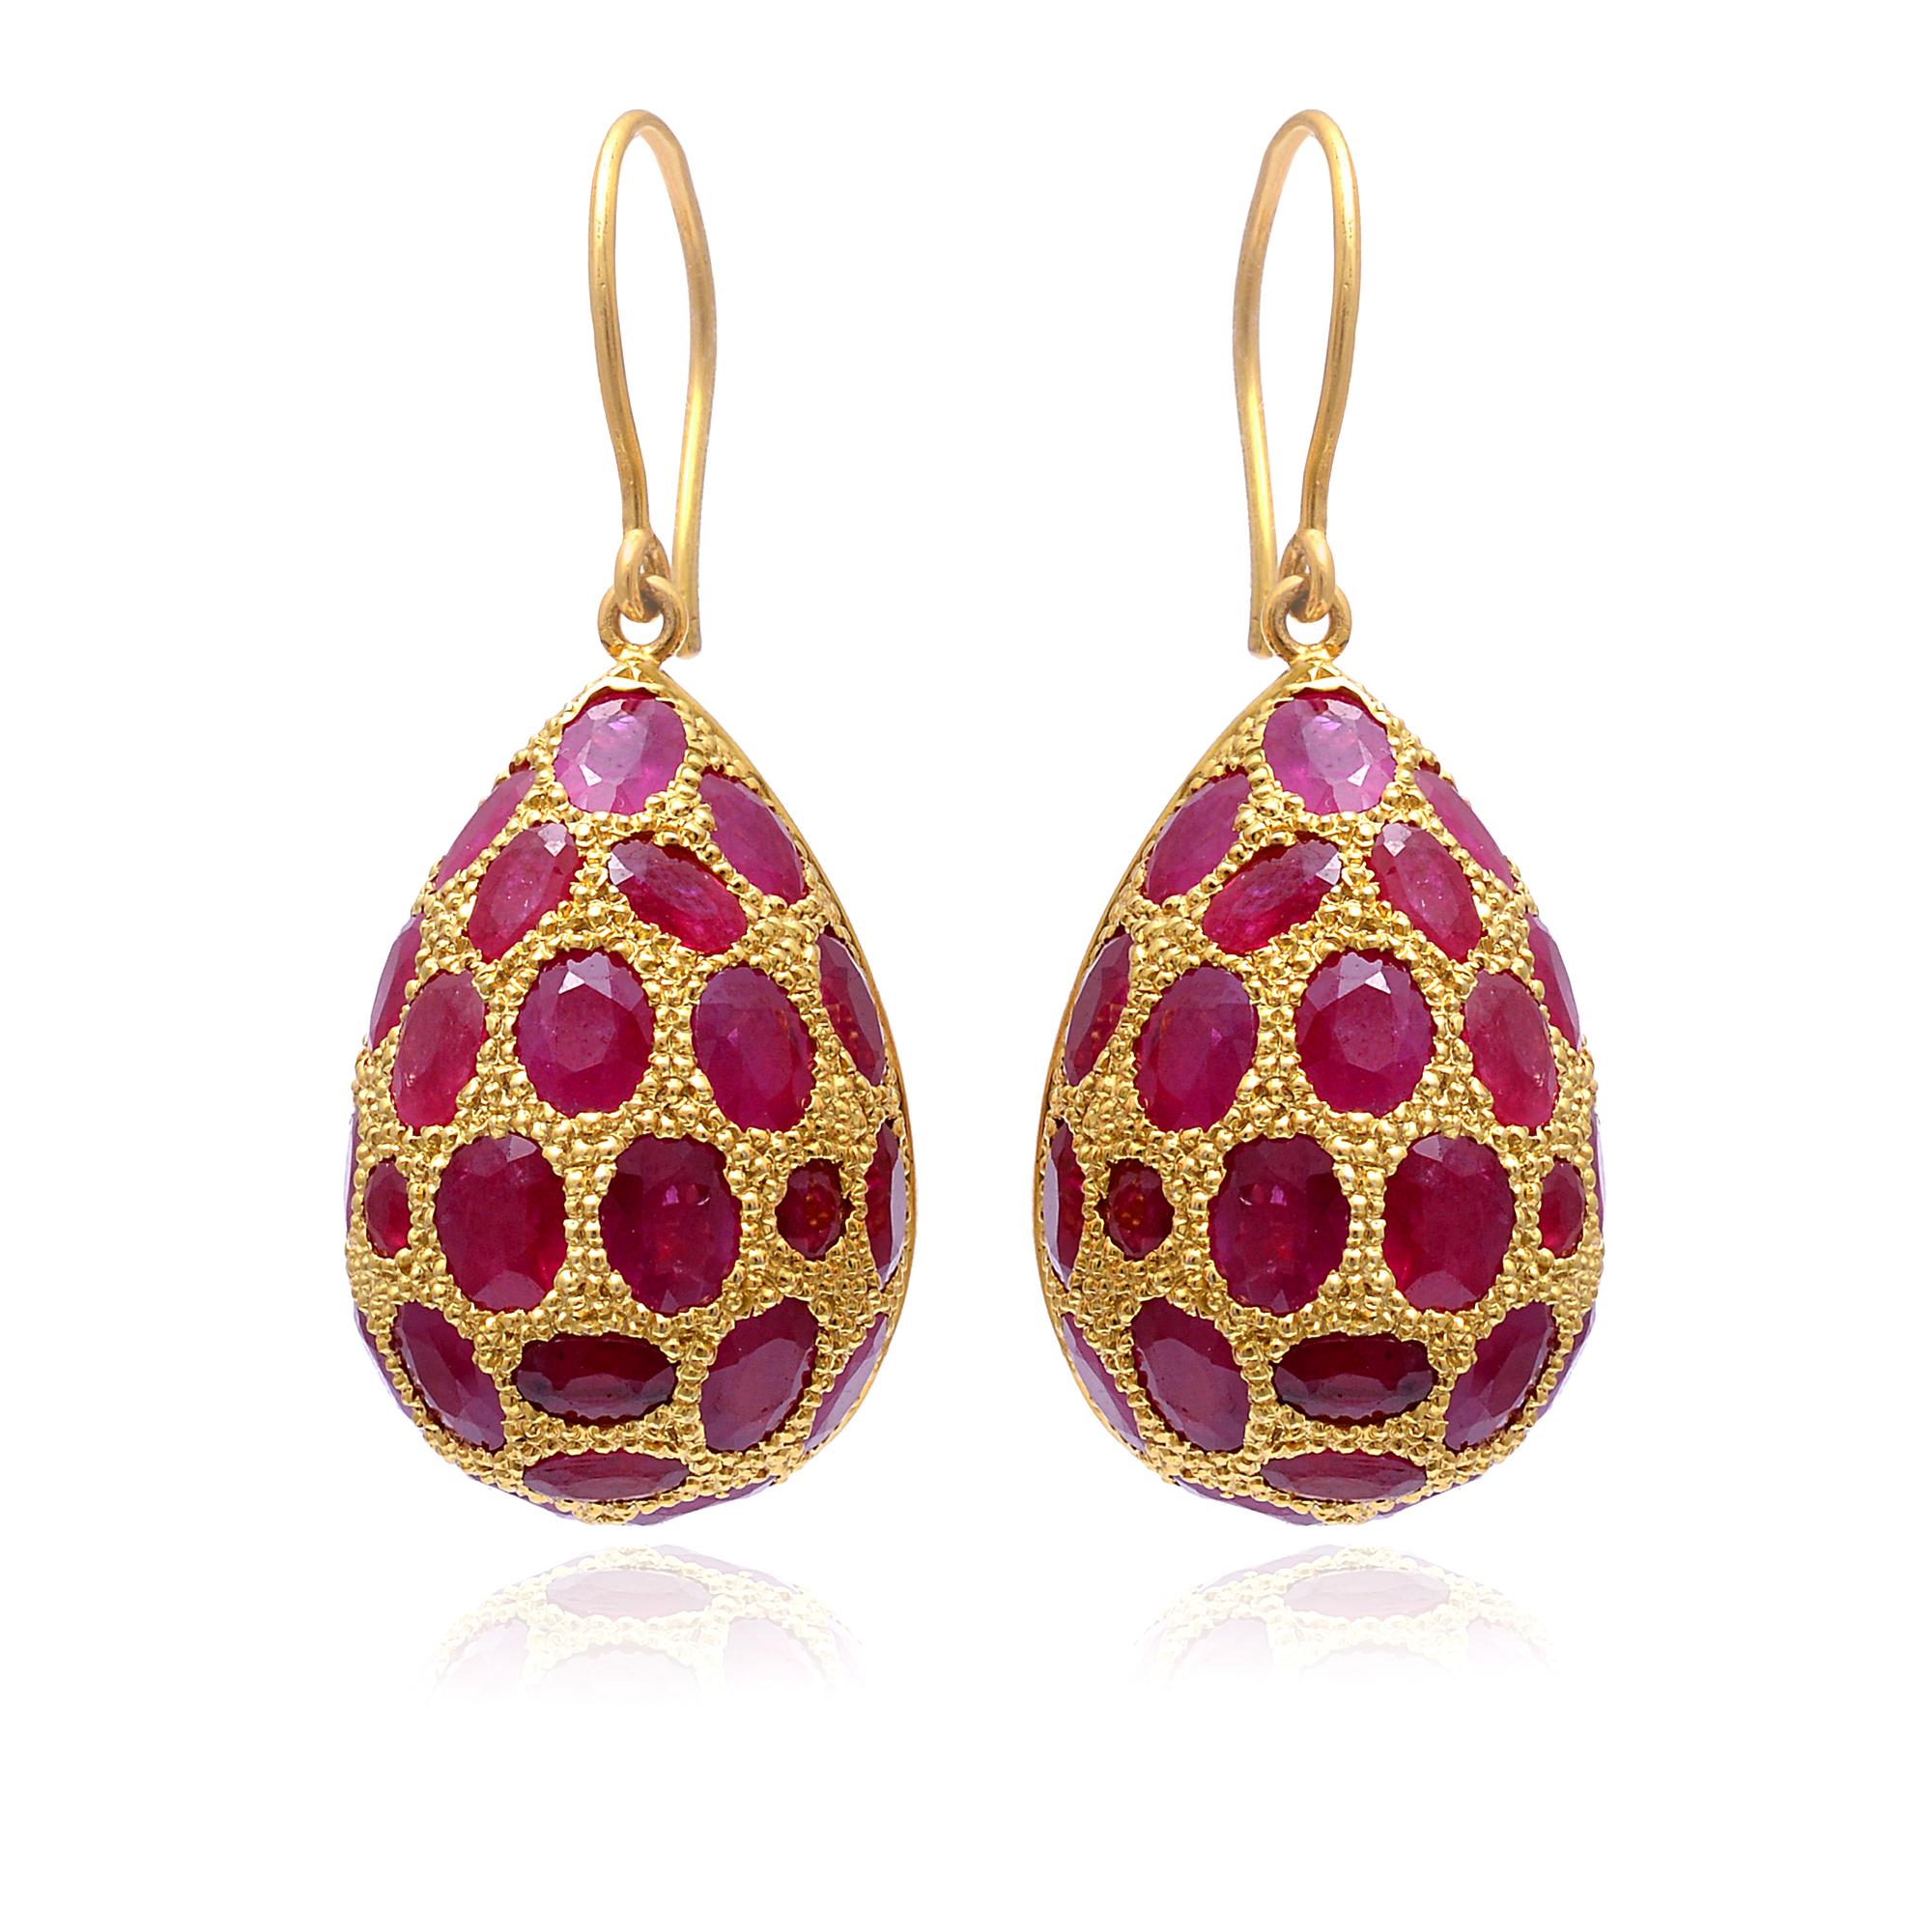 925 Sterling Silver Ruby Earring
Gross Weight: 16.240
Gold Weight: 0.750 Carats
Silver Weight: 11.720 gms
Ruby Weight: 18.85
Dimension: 35x16 MM
